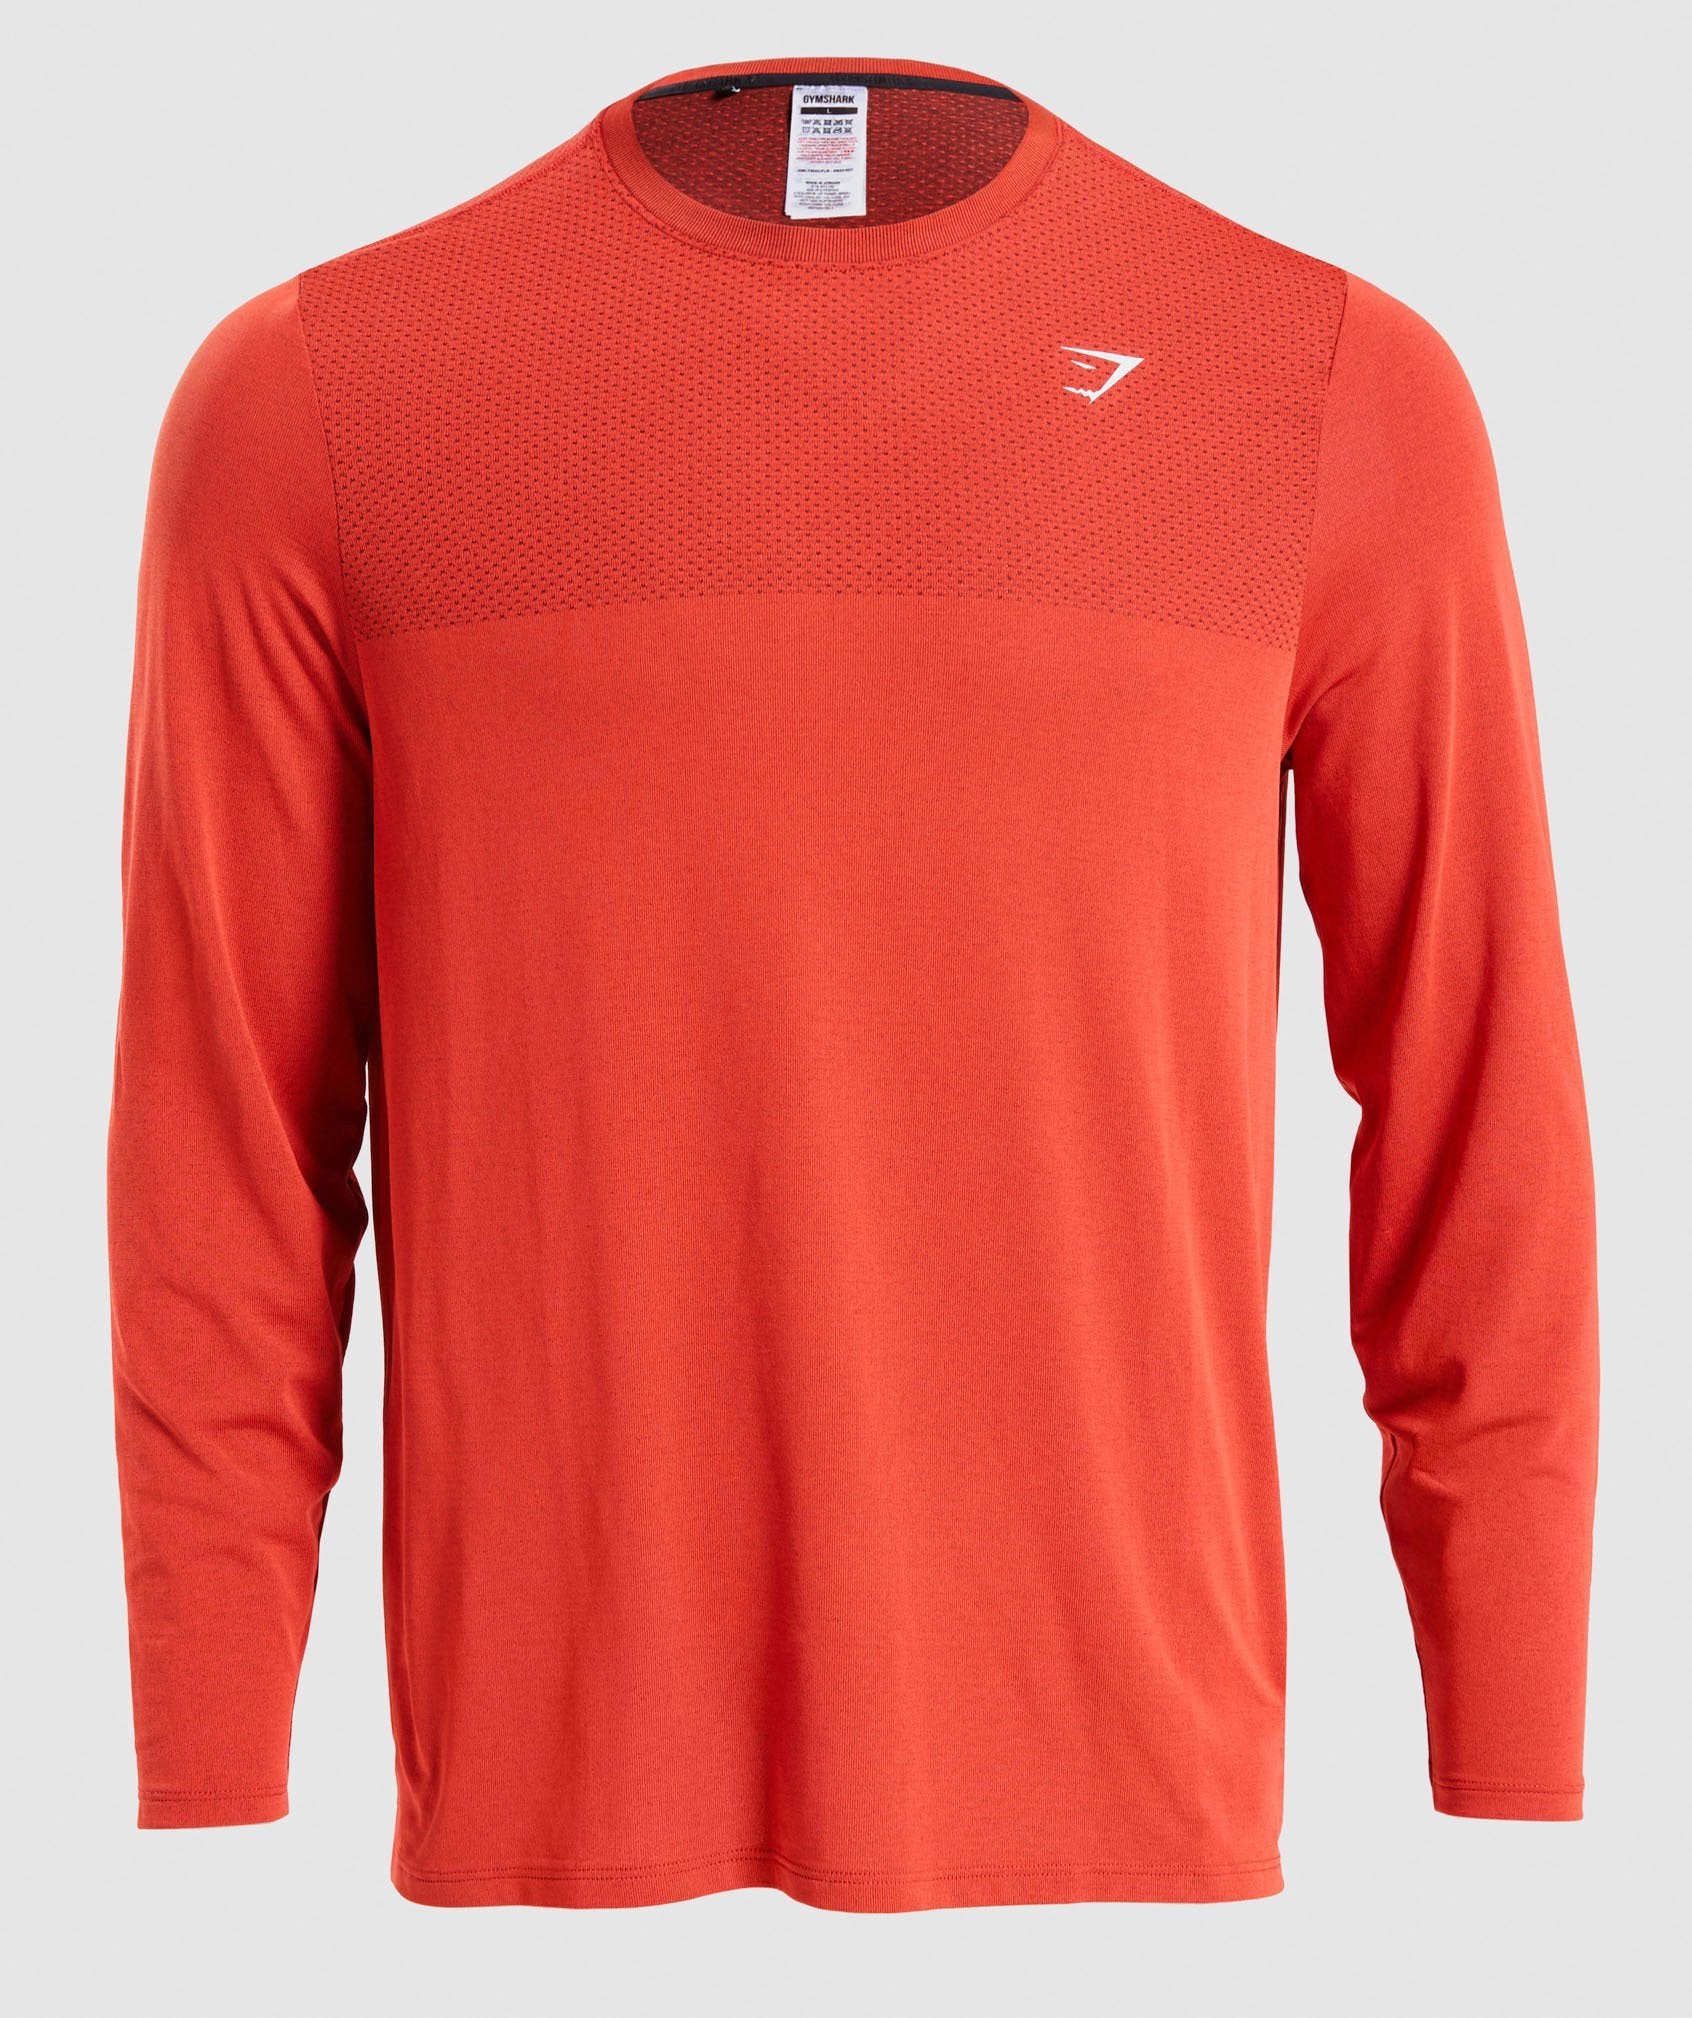 Vital Long Sleeve T-Shirt in Red